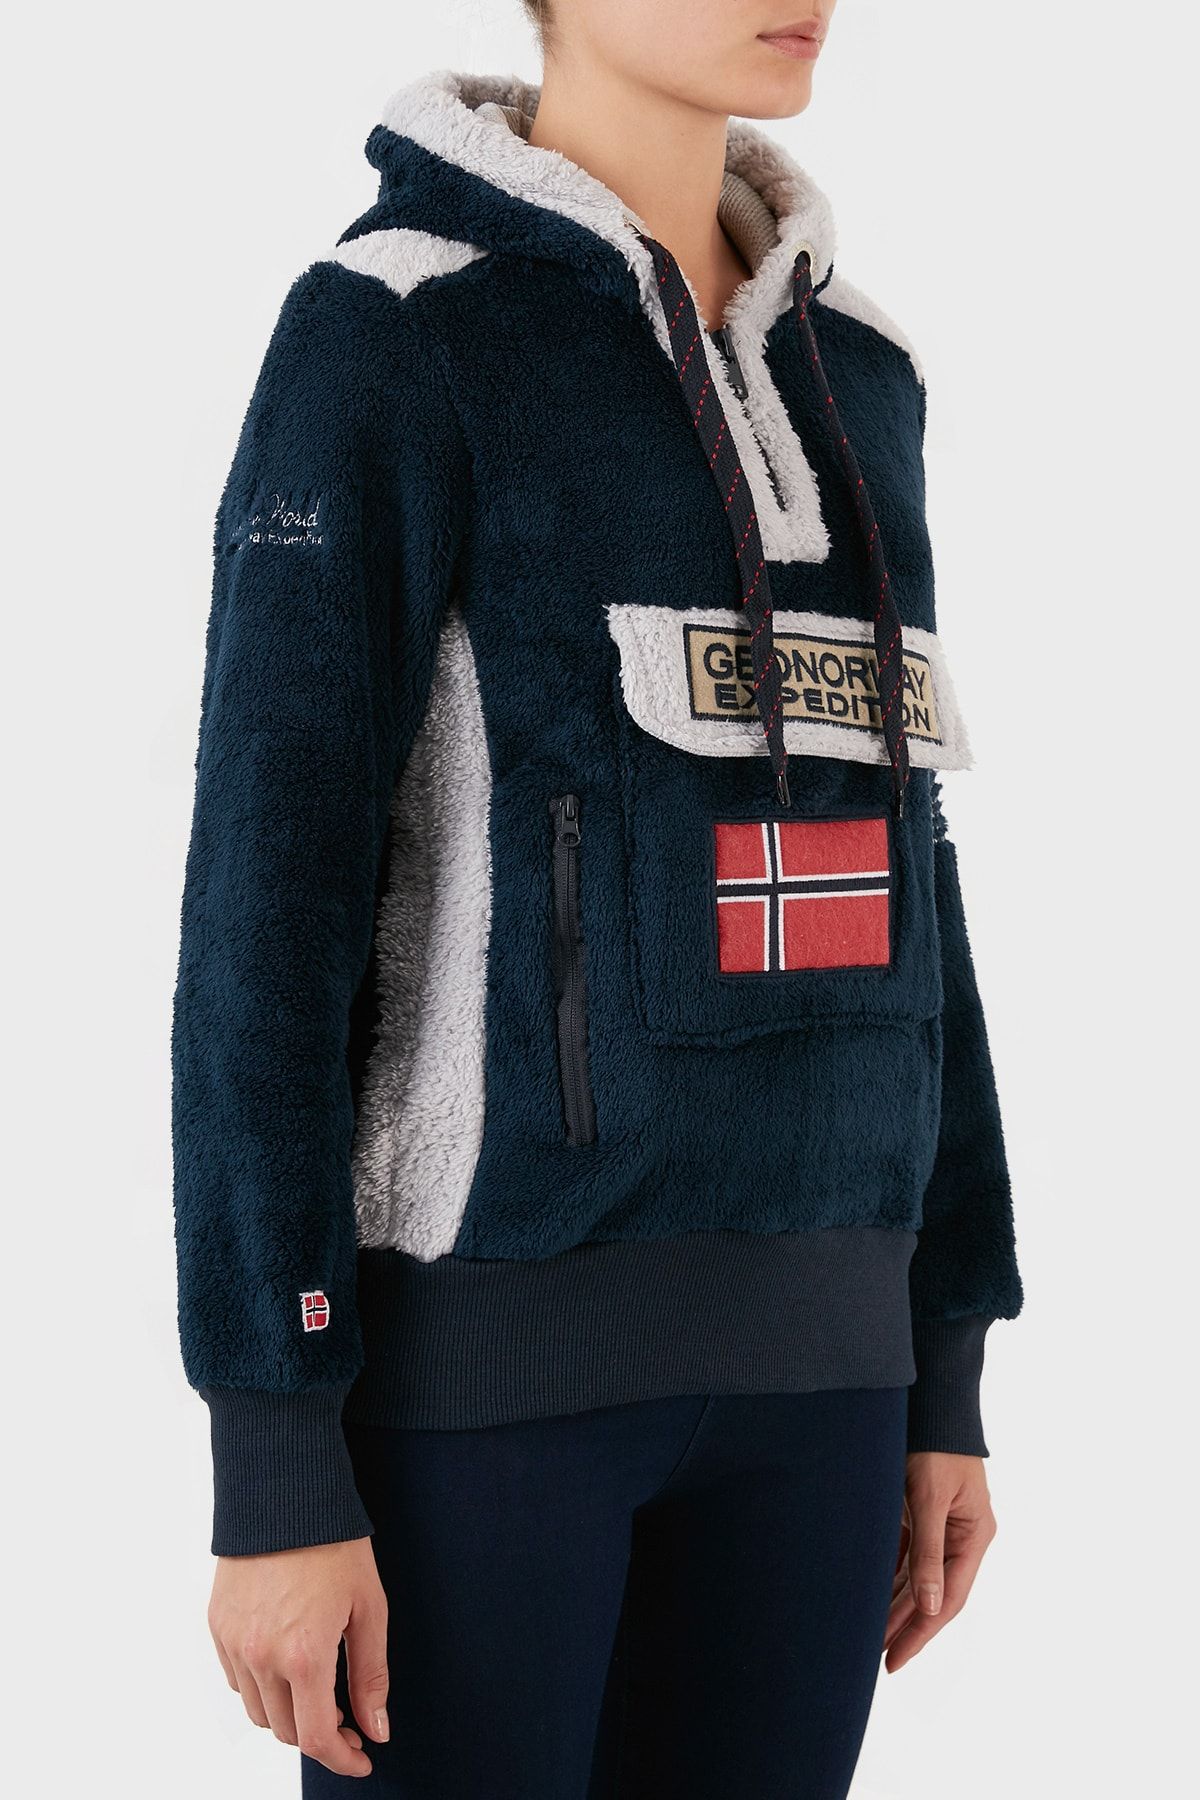 Geographical Norway GYMCLASS Black - Free delivery